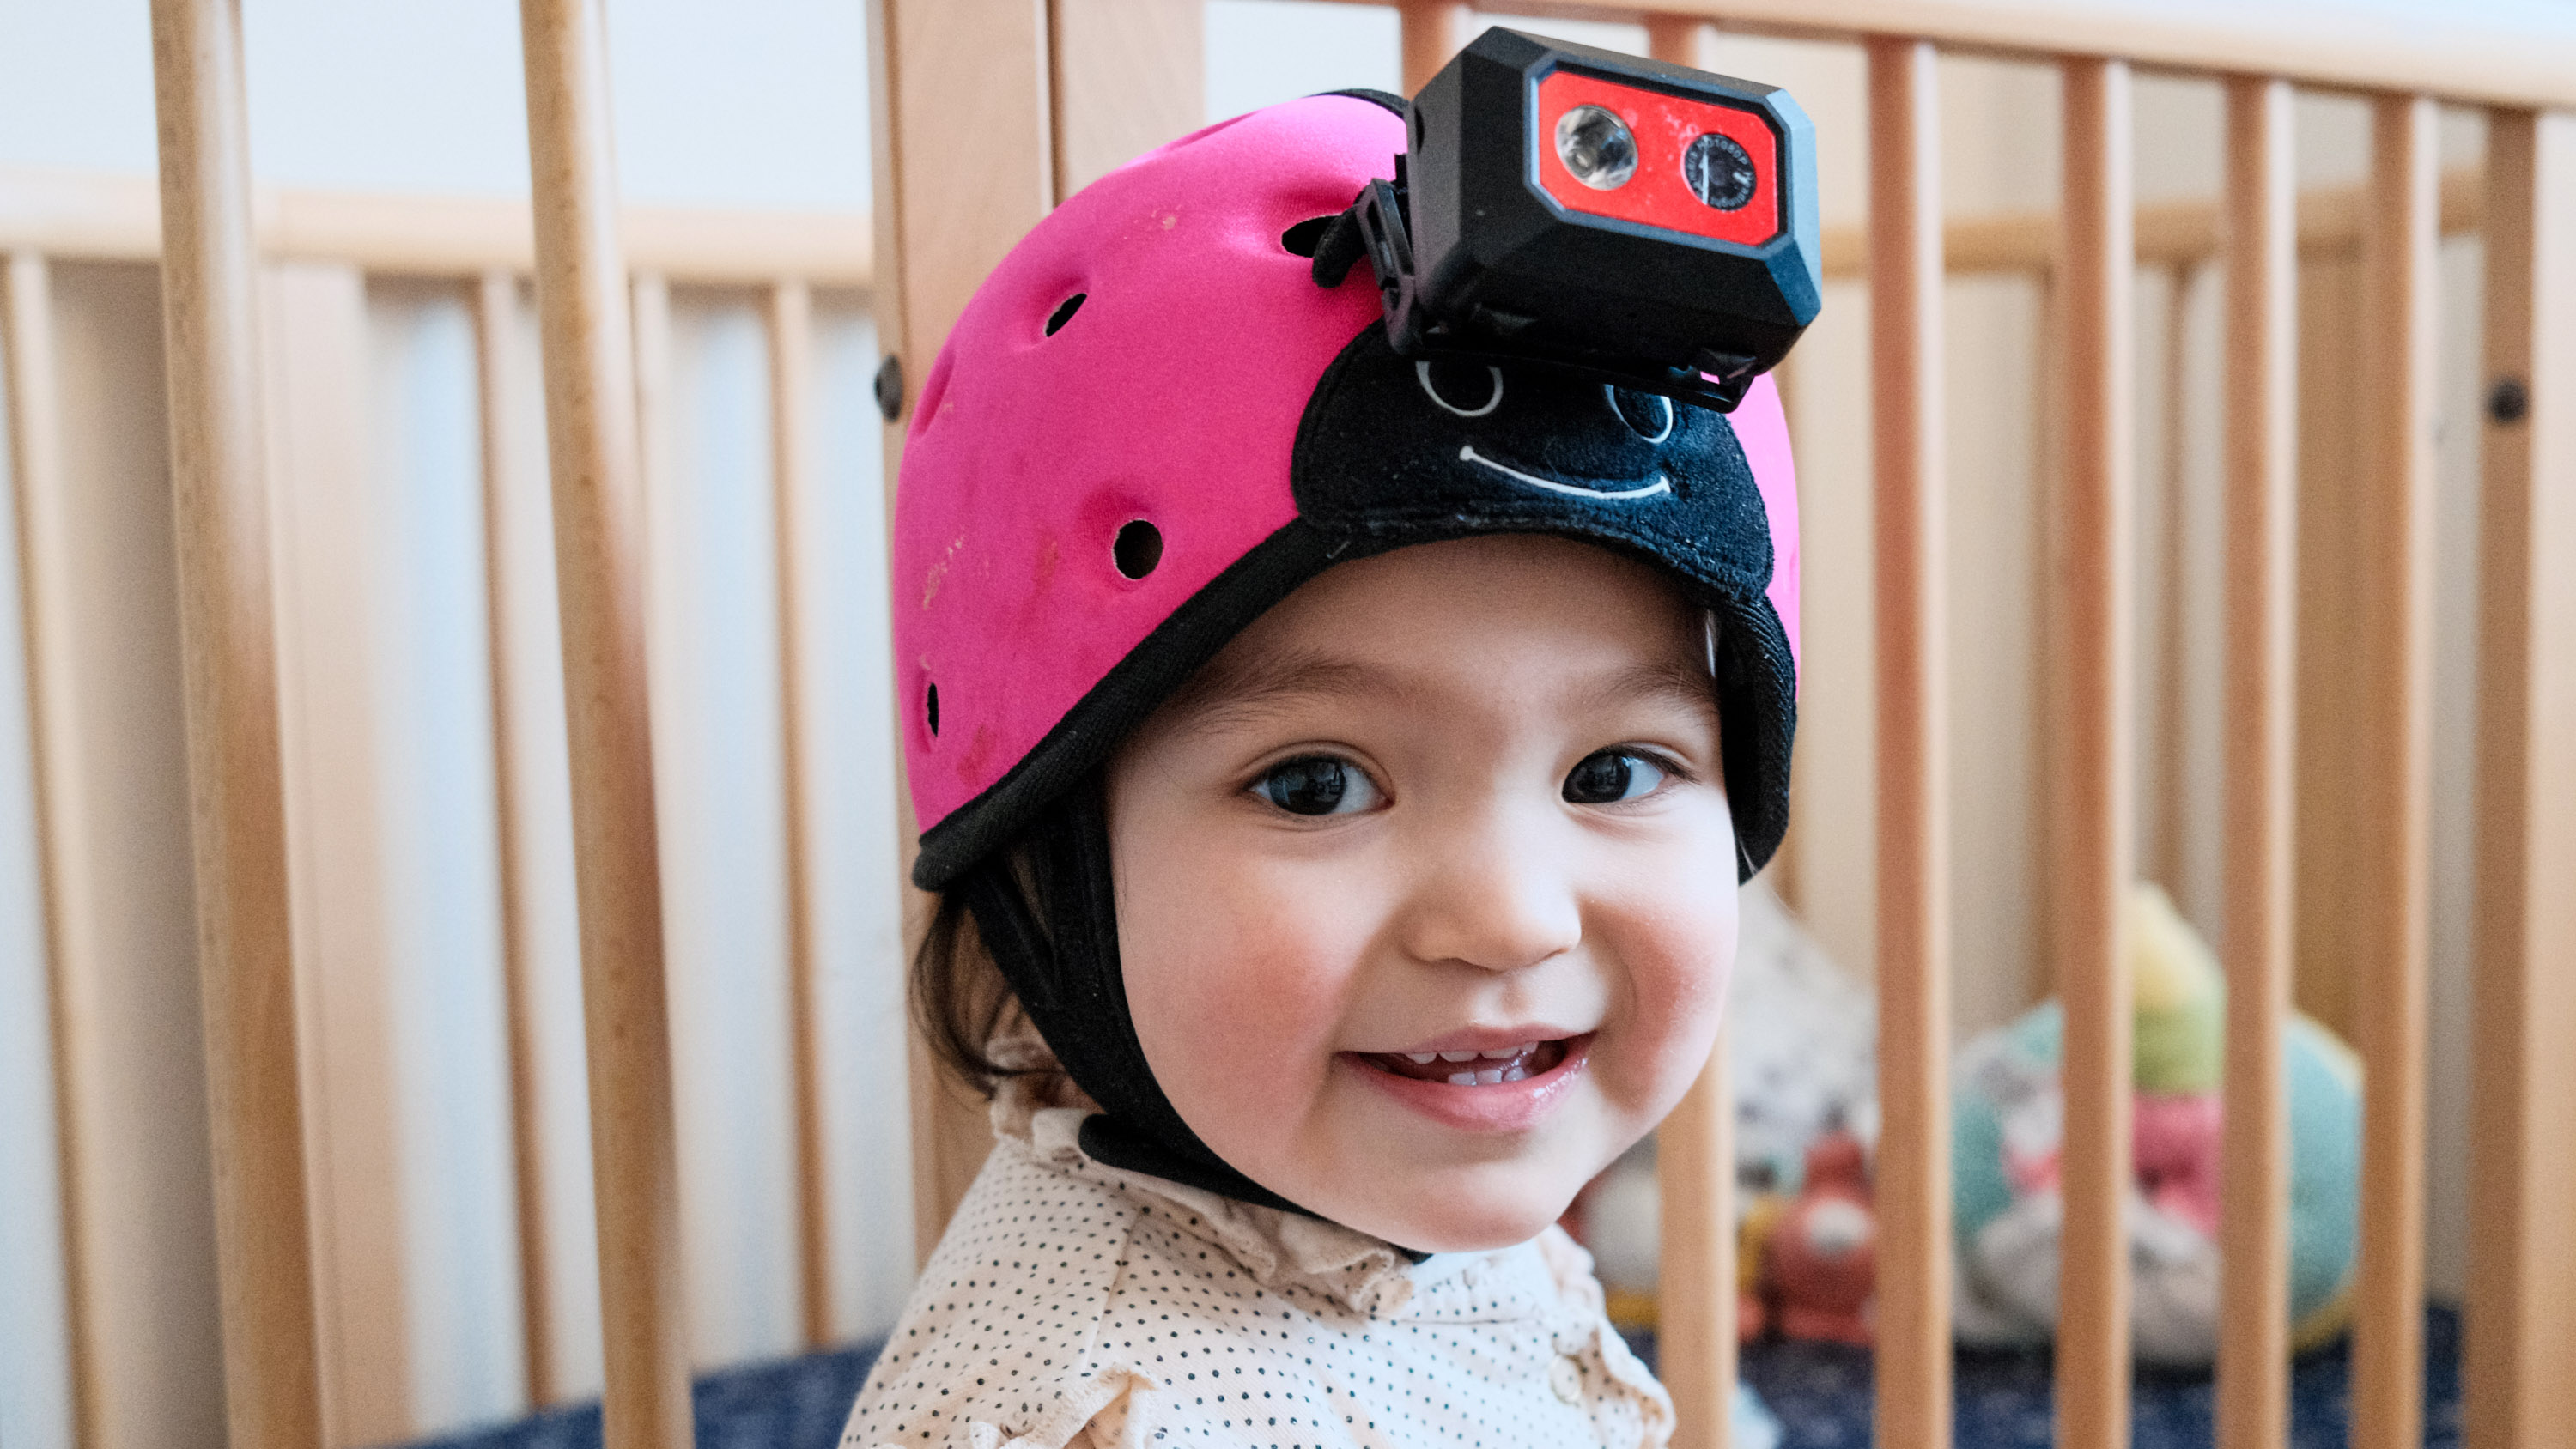 closeup of a smiling baby wearing a helmet camera with the bars of a crib in the background